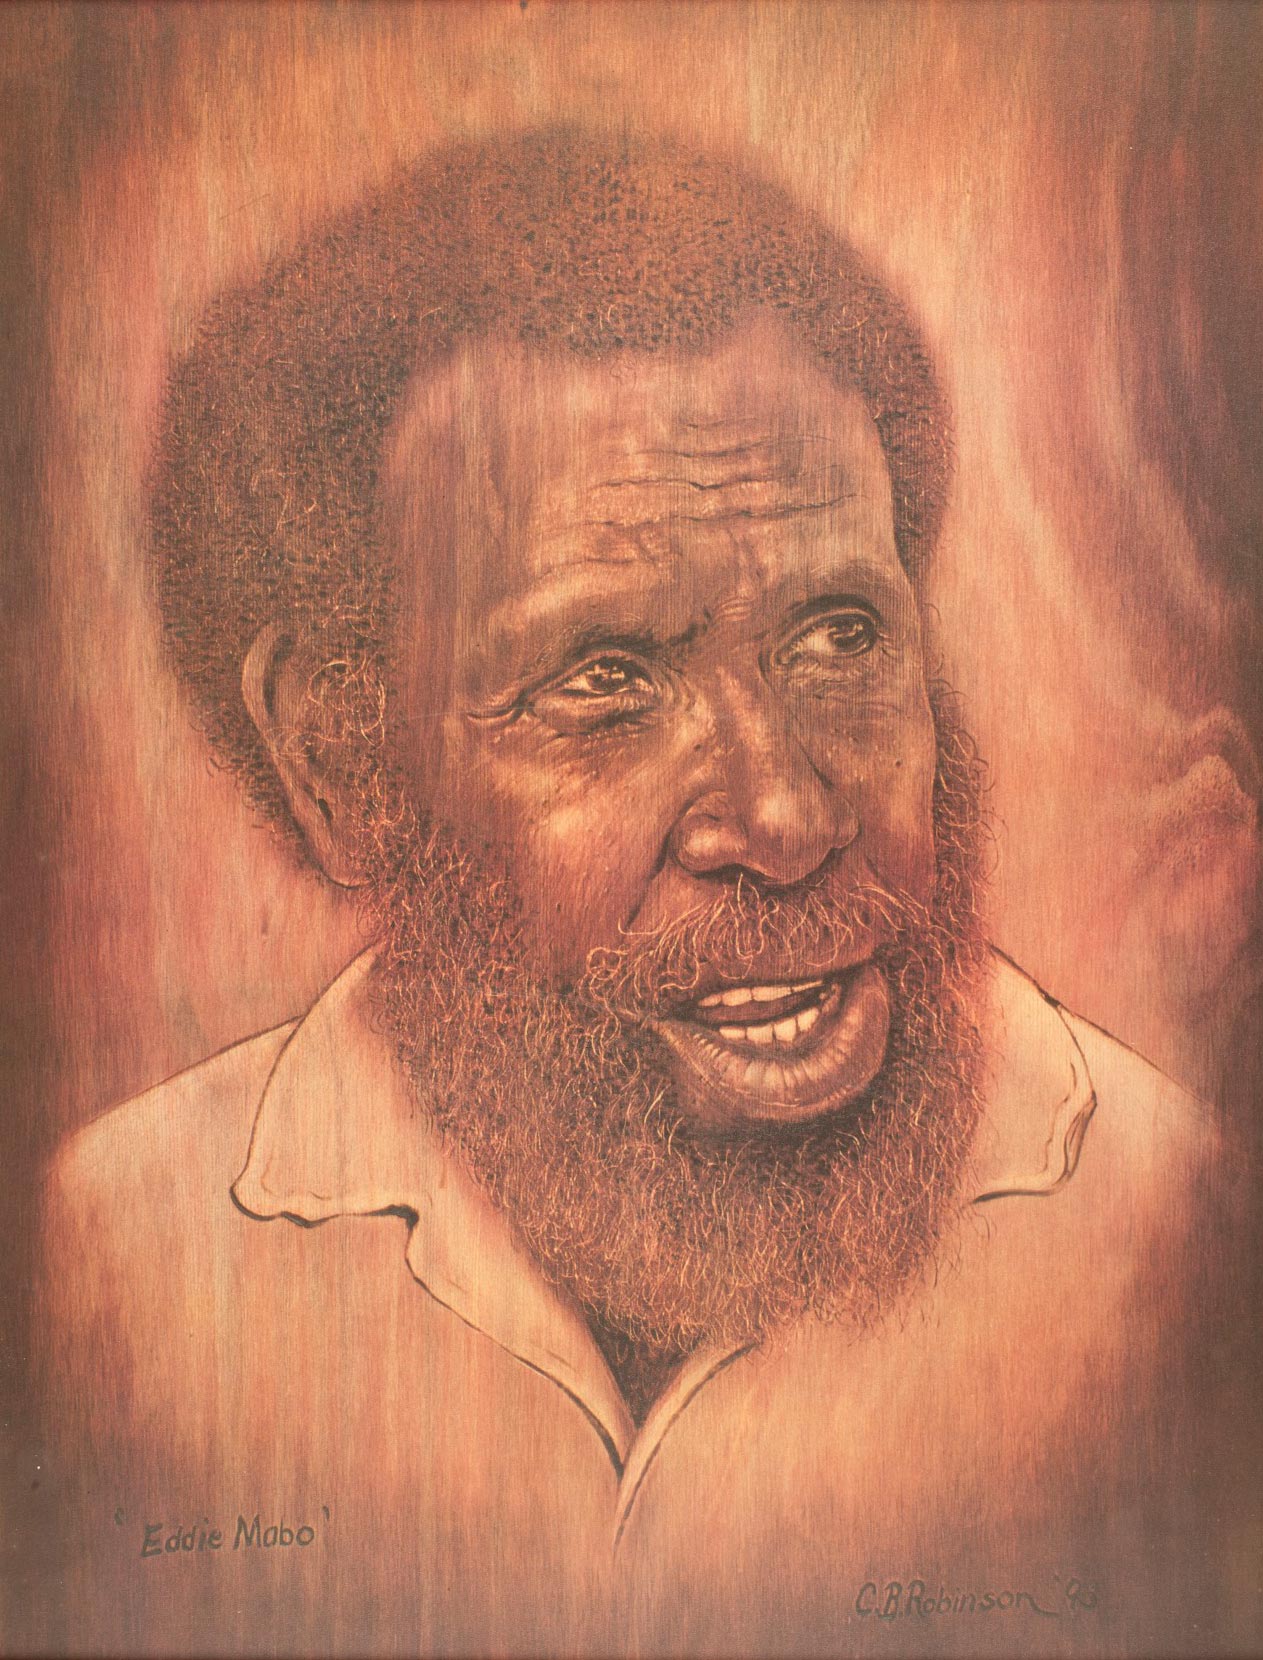 Poster of Eddie Mabo, by Clifford Beresford Robinson, 1993.